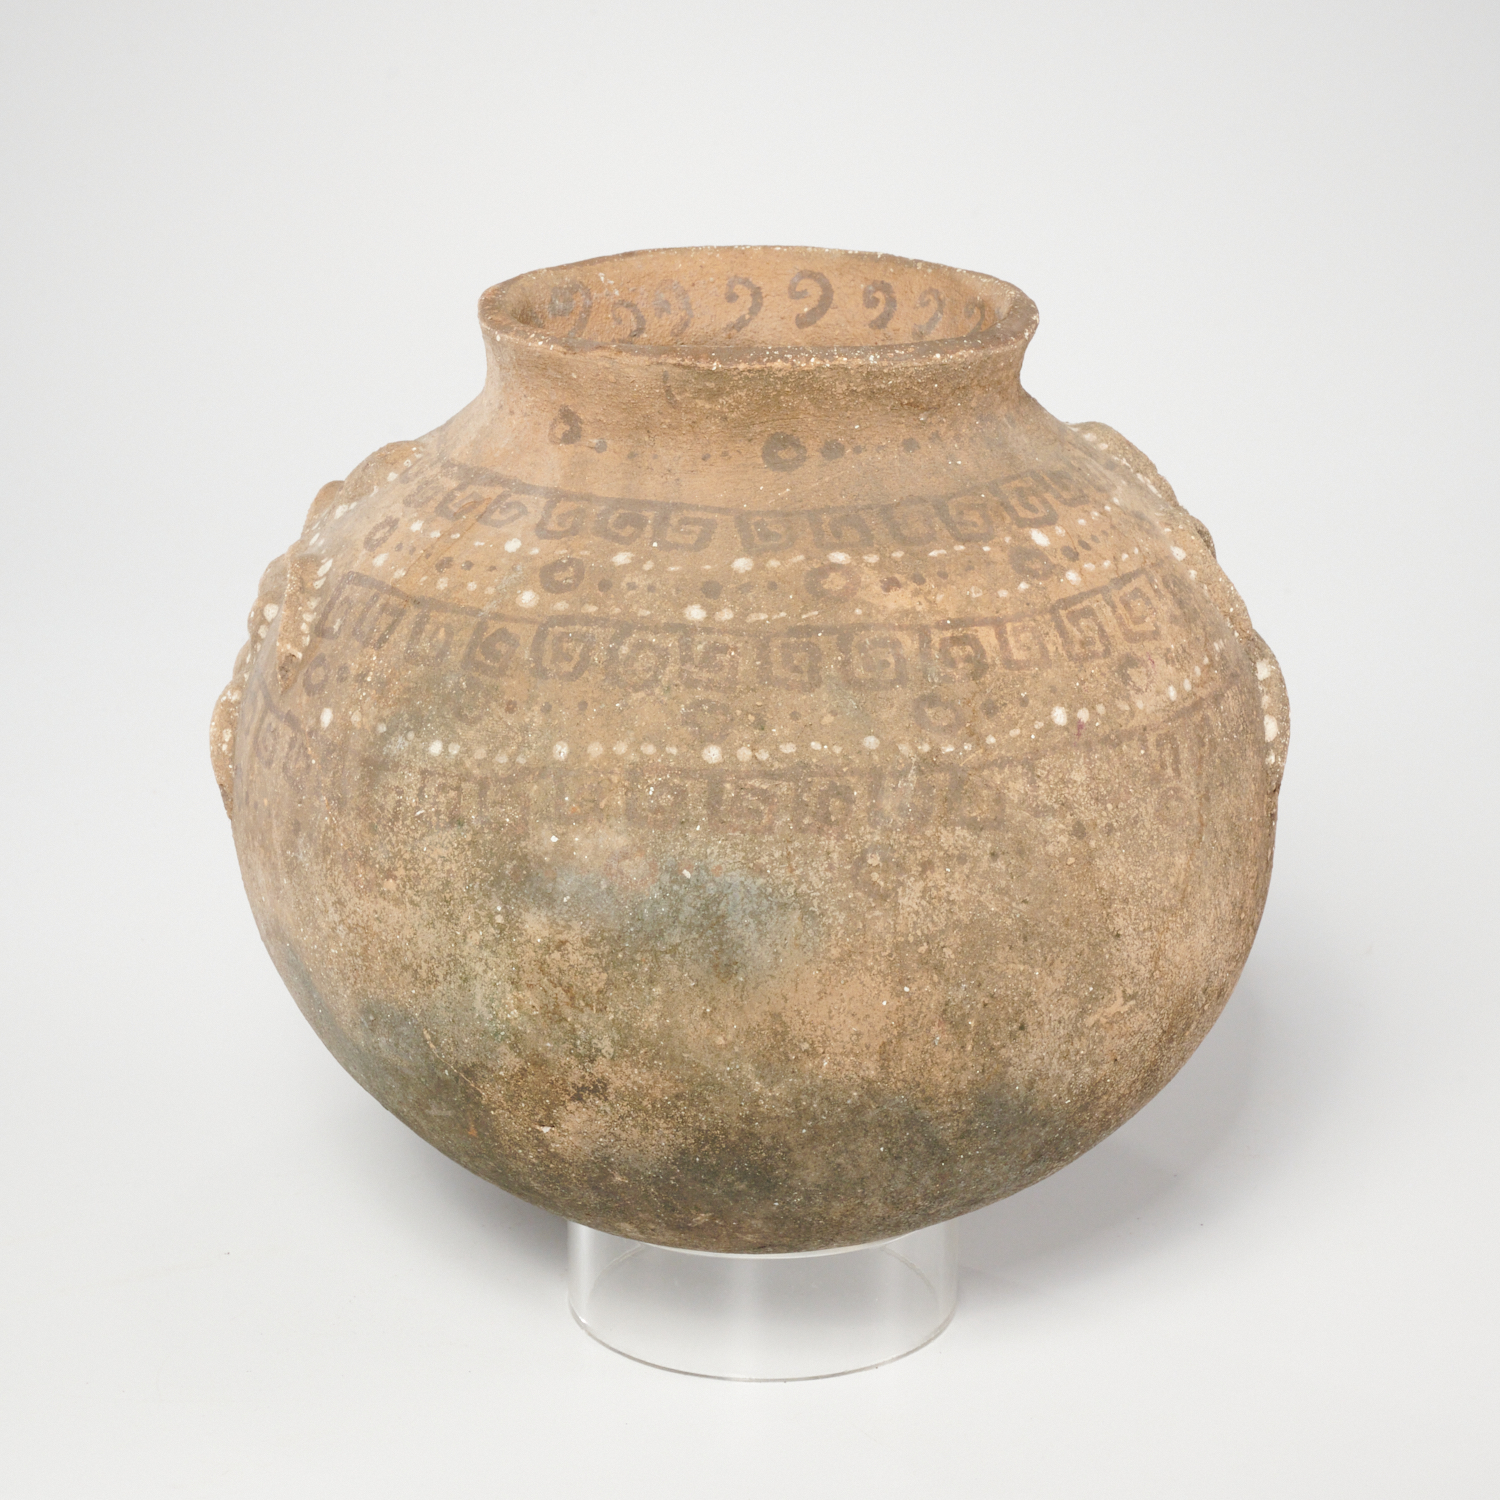 ARCHAIC POTTERY VESSEL WITH HUMANOID 360b56